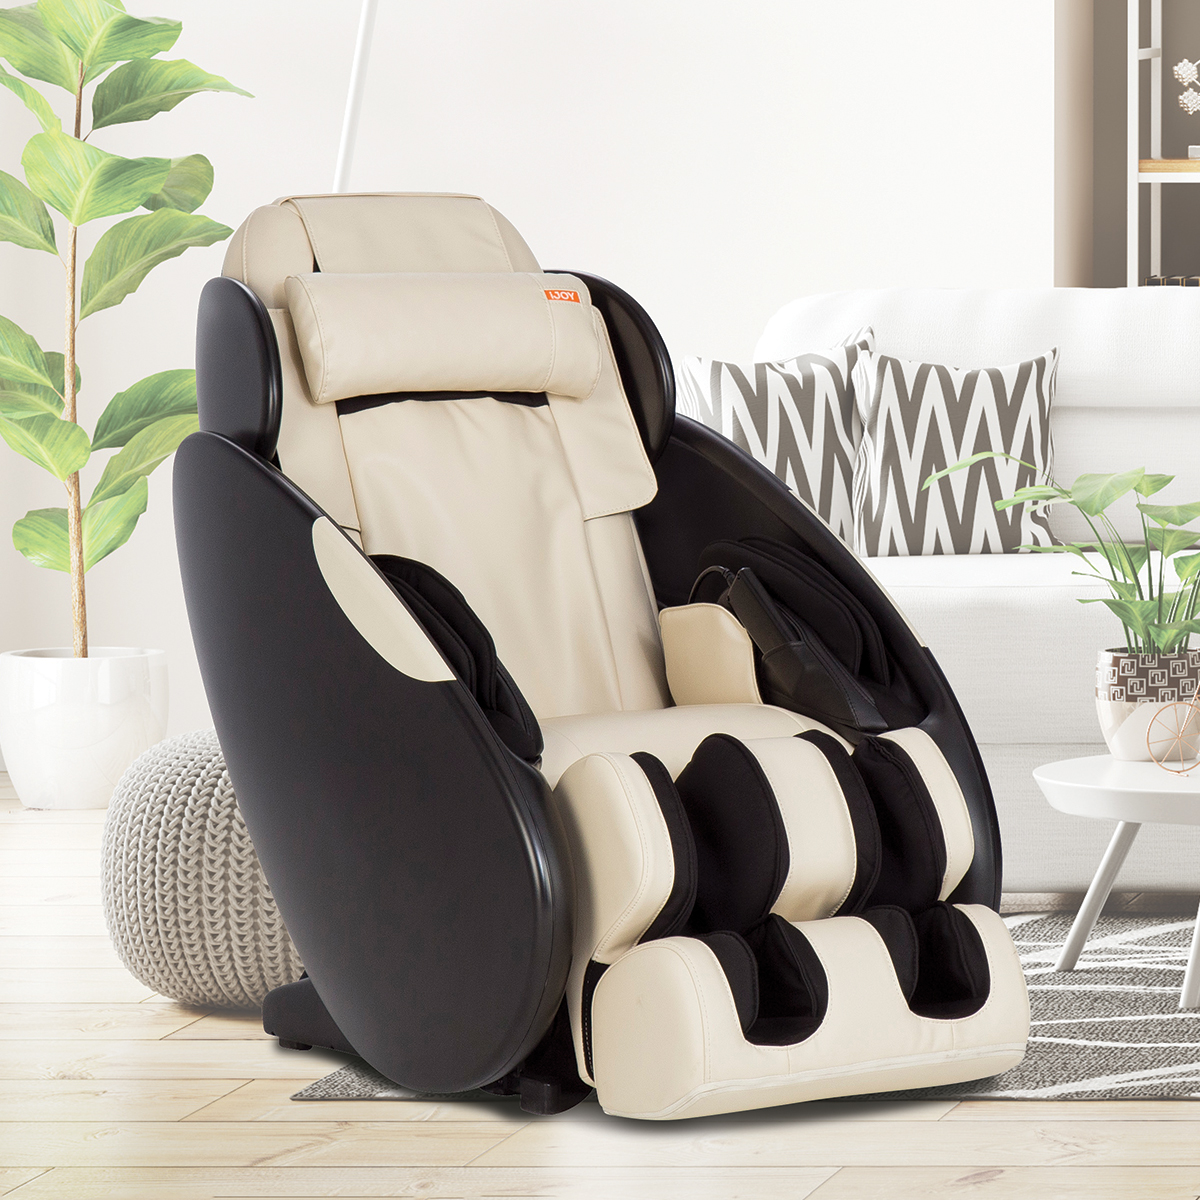 iJOY Total Massage chair